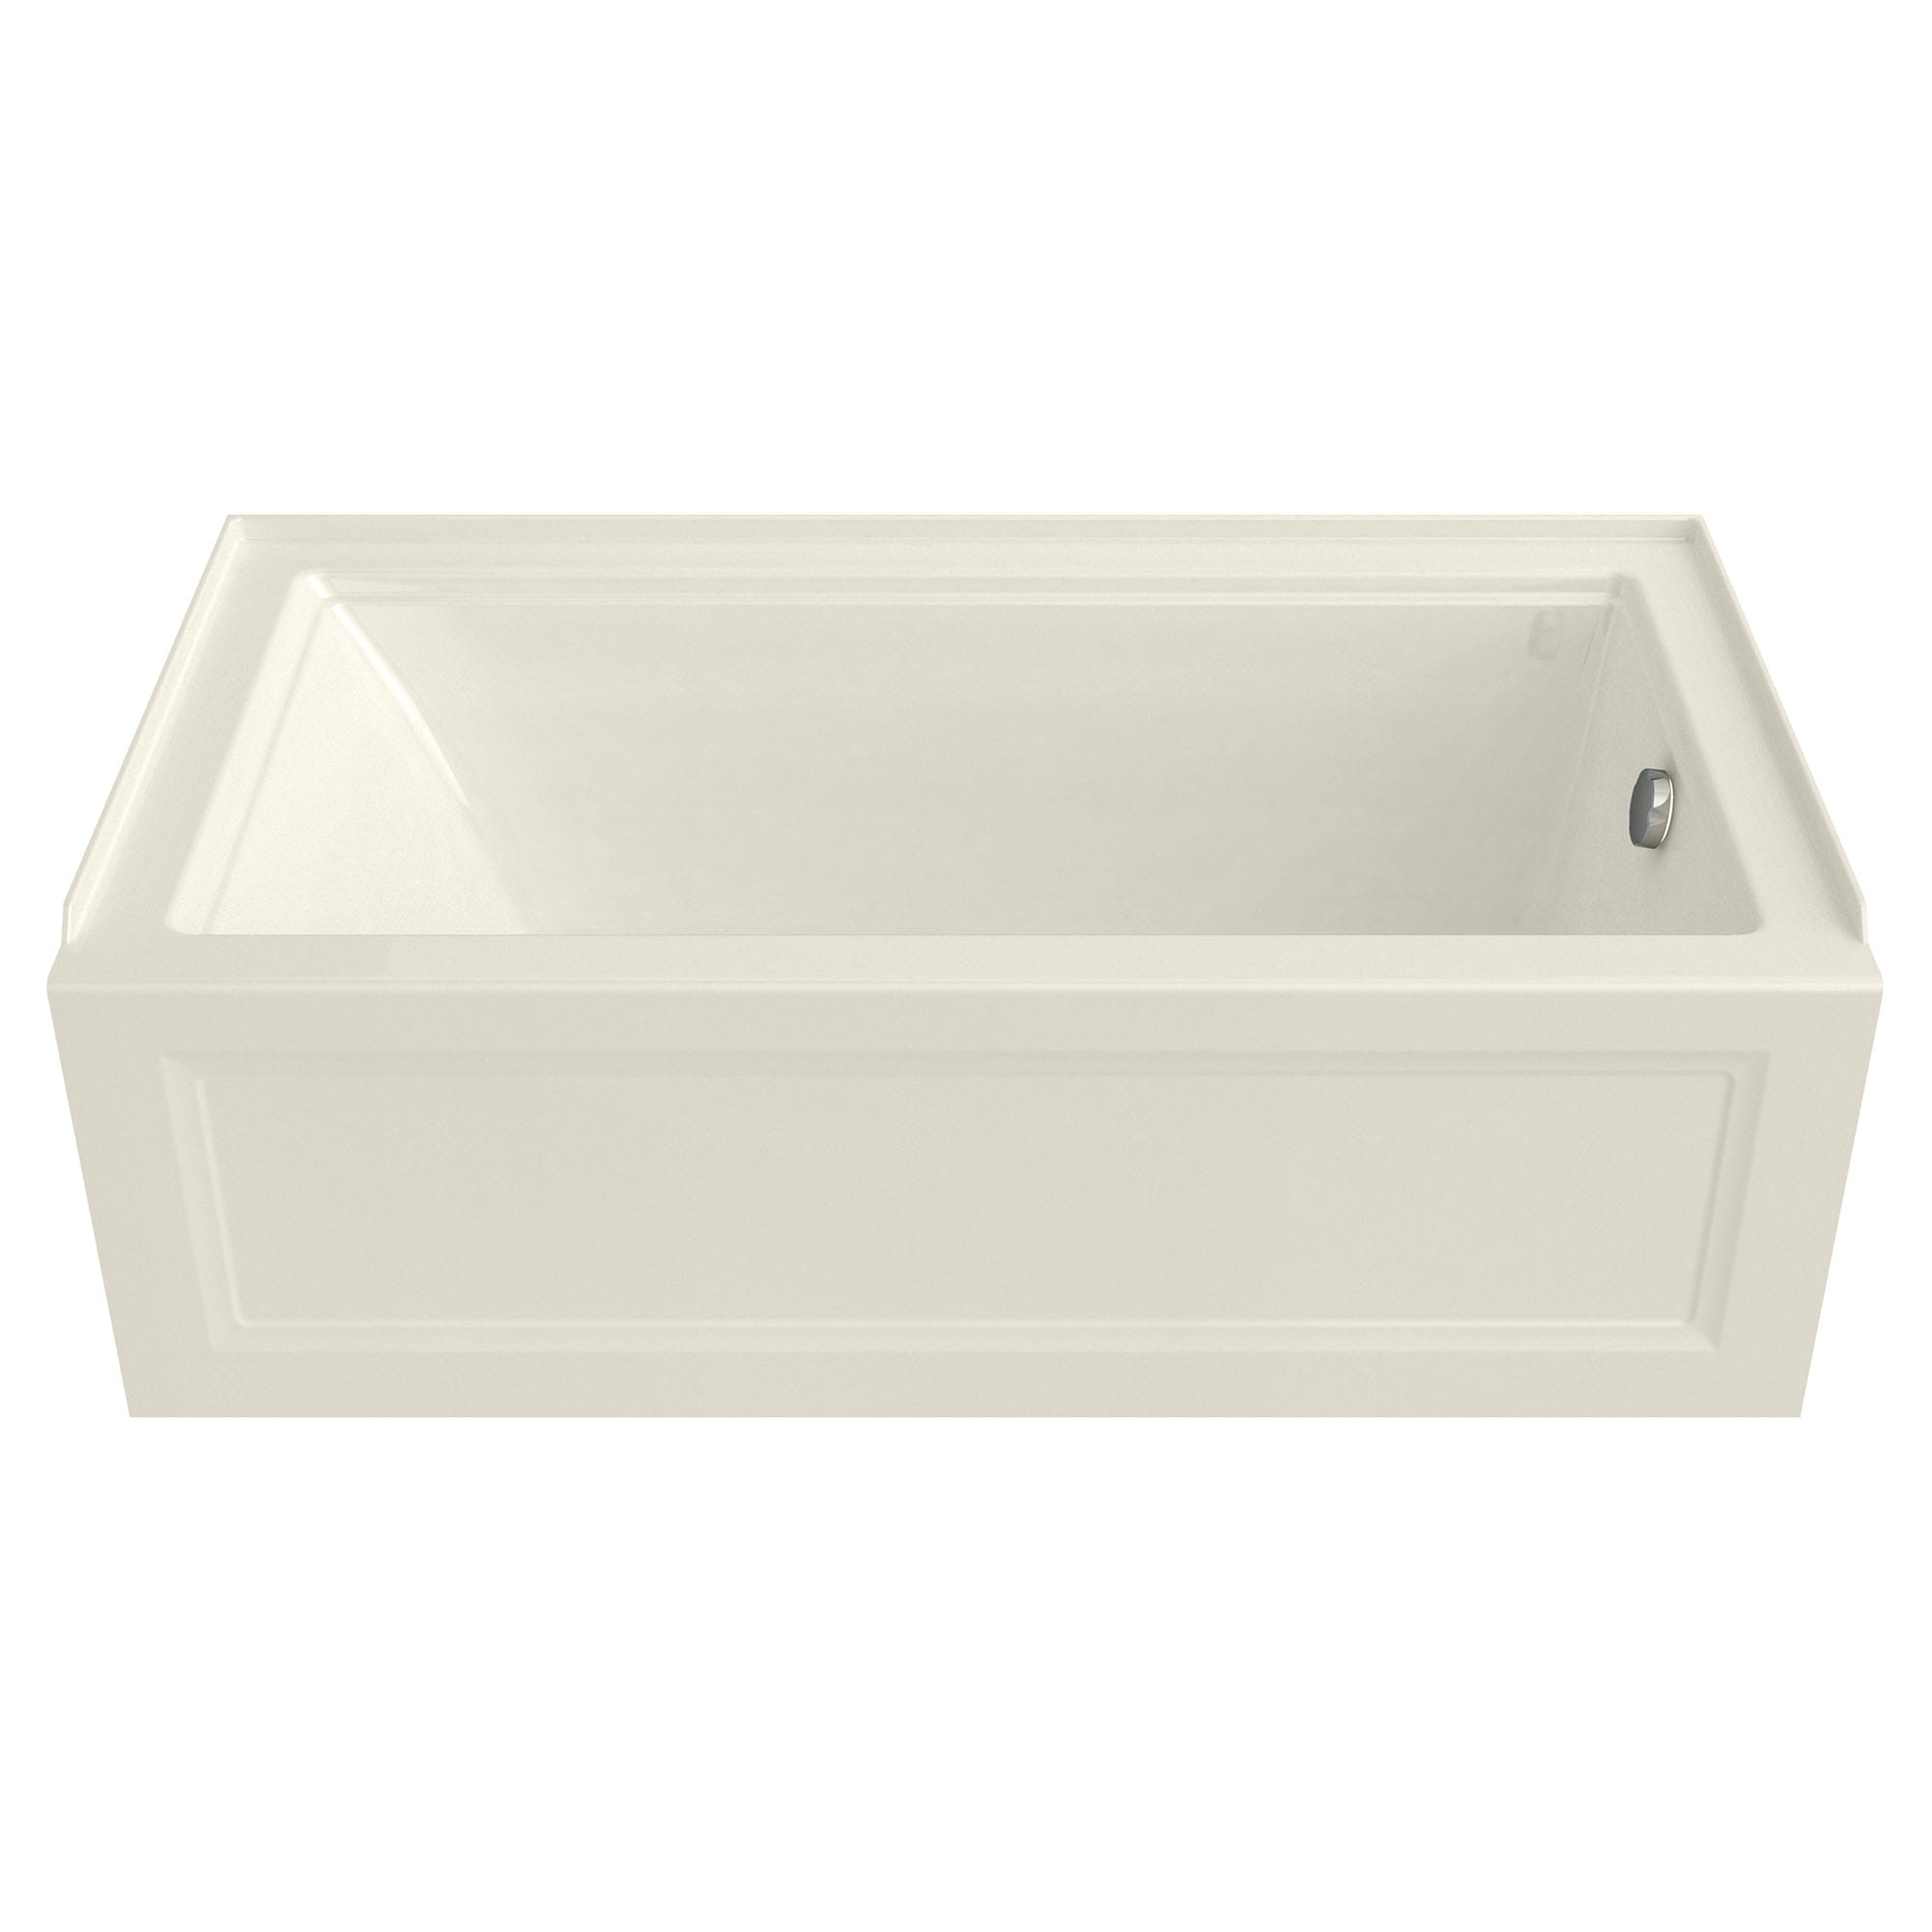 Town Square S 60 x 32 Inch Integral Apron Bathtub With Right Hand Outlet LINEN